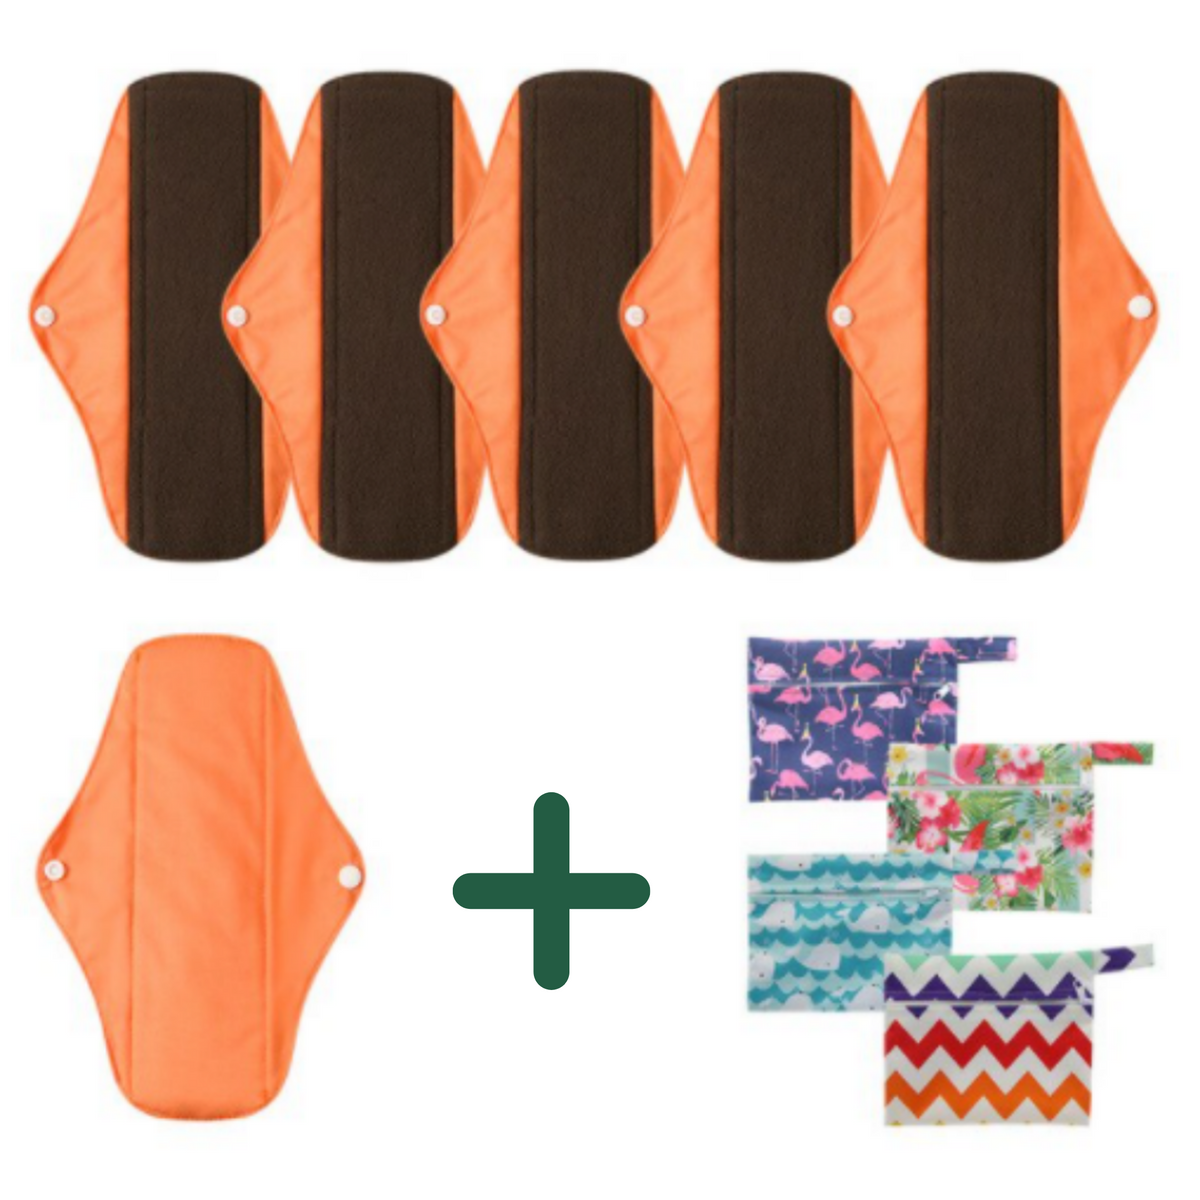 EcoPads - Value Pack (6 Pads + 1 Free Wet Bag)